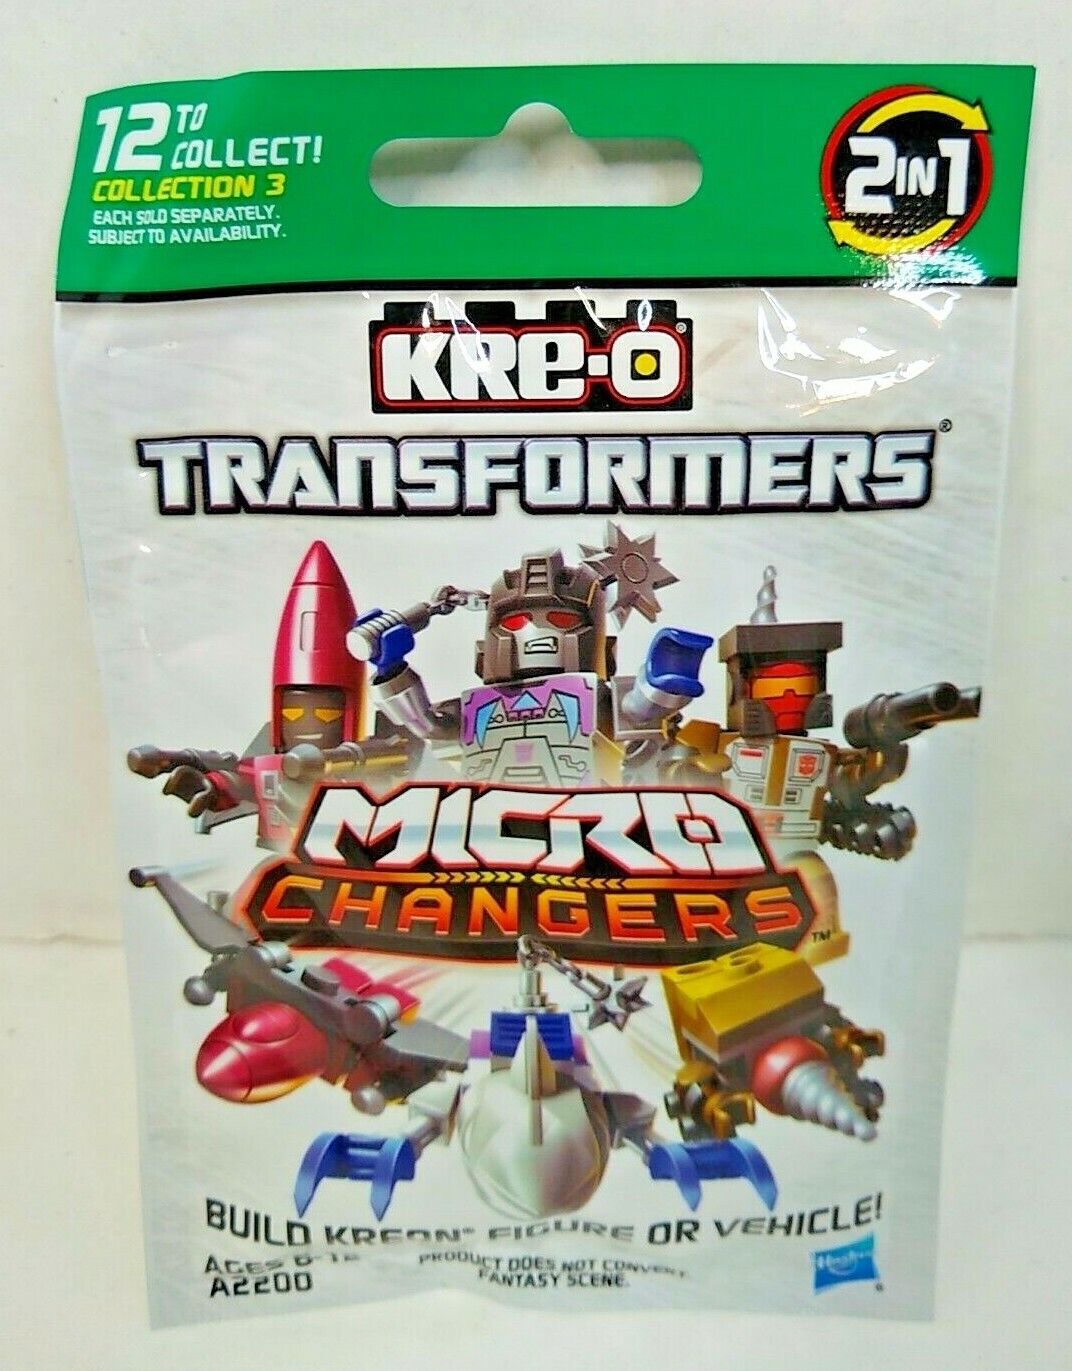 Kre-o Transformers Micro Chargers Collection 2 Blind Bag Christmas Stocking New 